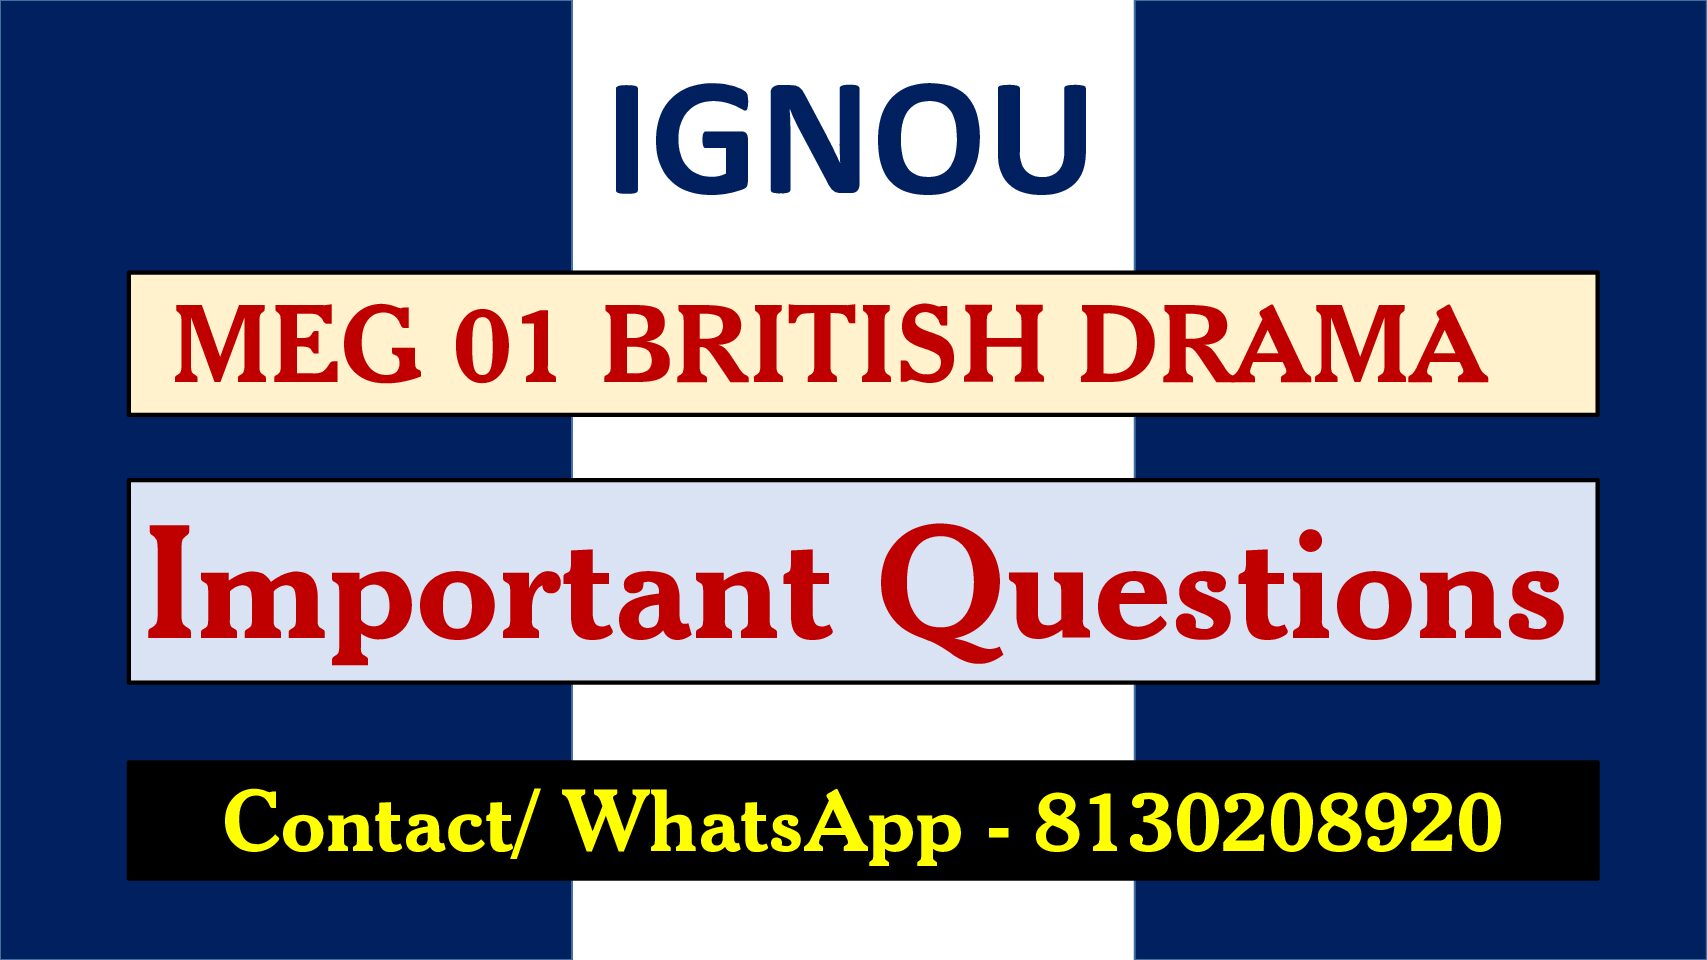 IGNOU MEG 02 British Drama Important Questions / Previous Years Solved Papers